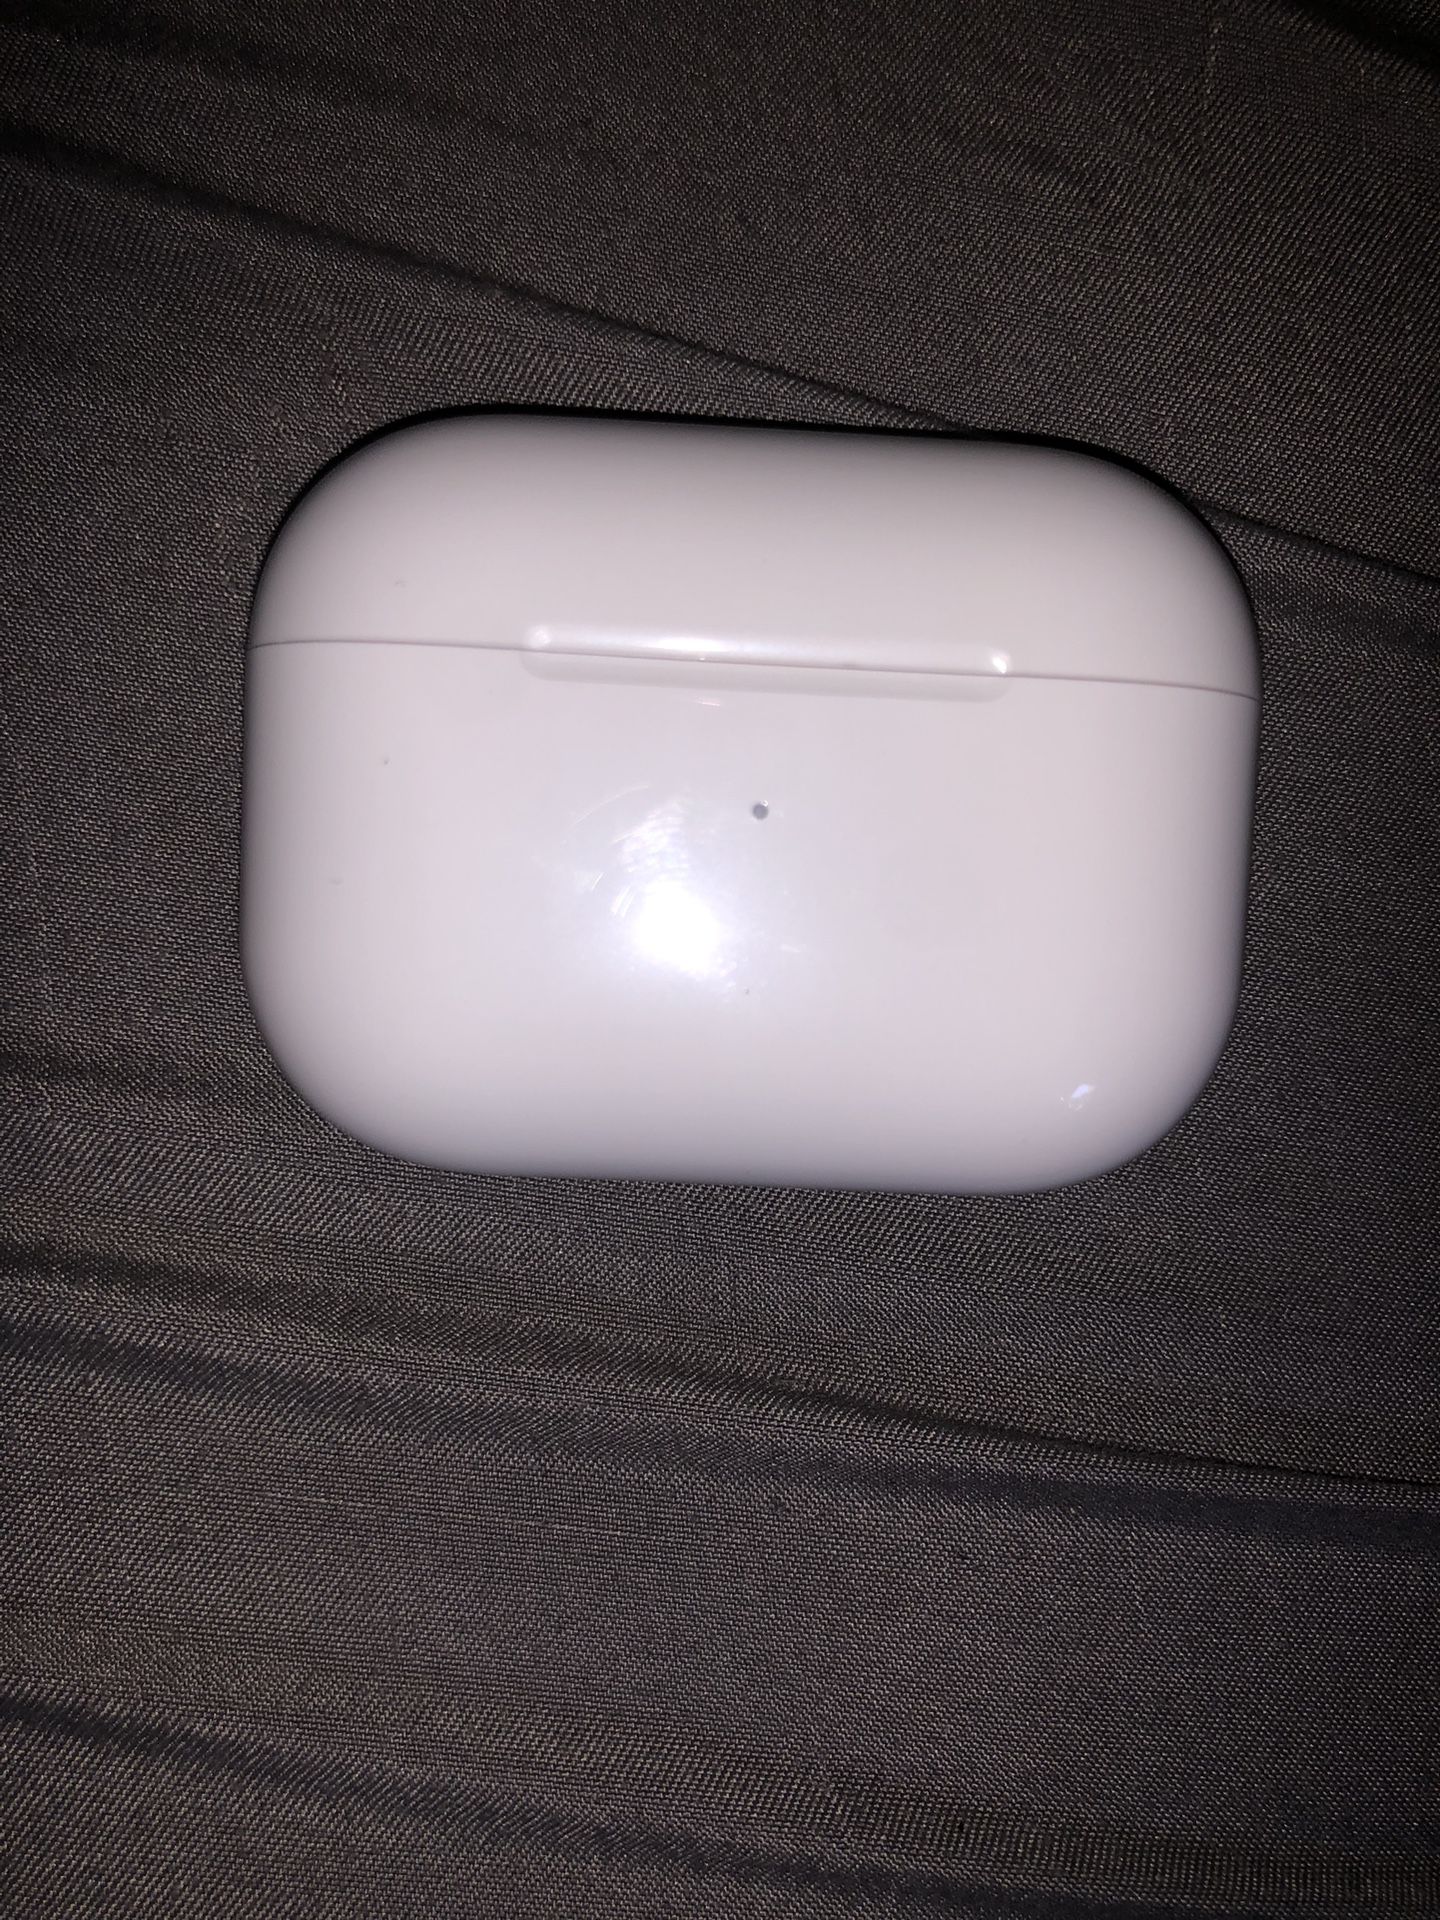 Airpods Pro’s 2nd gen